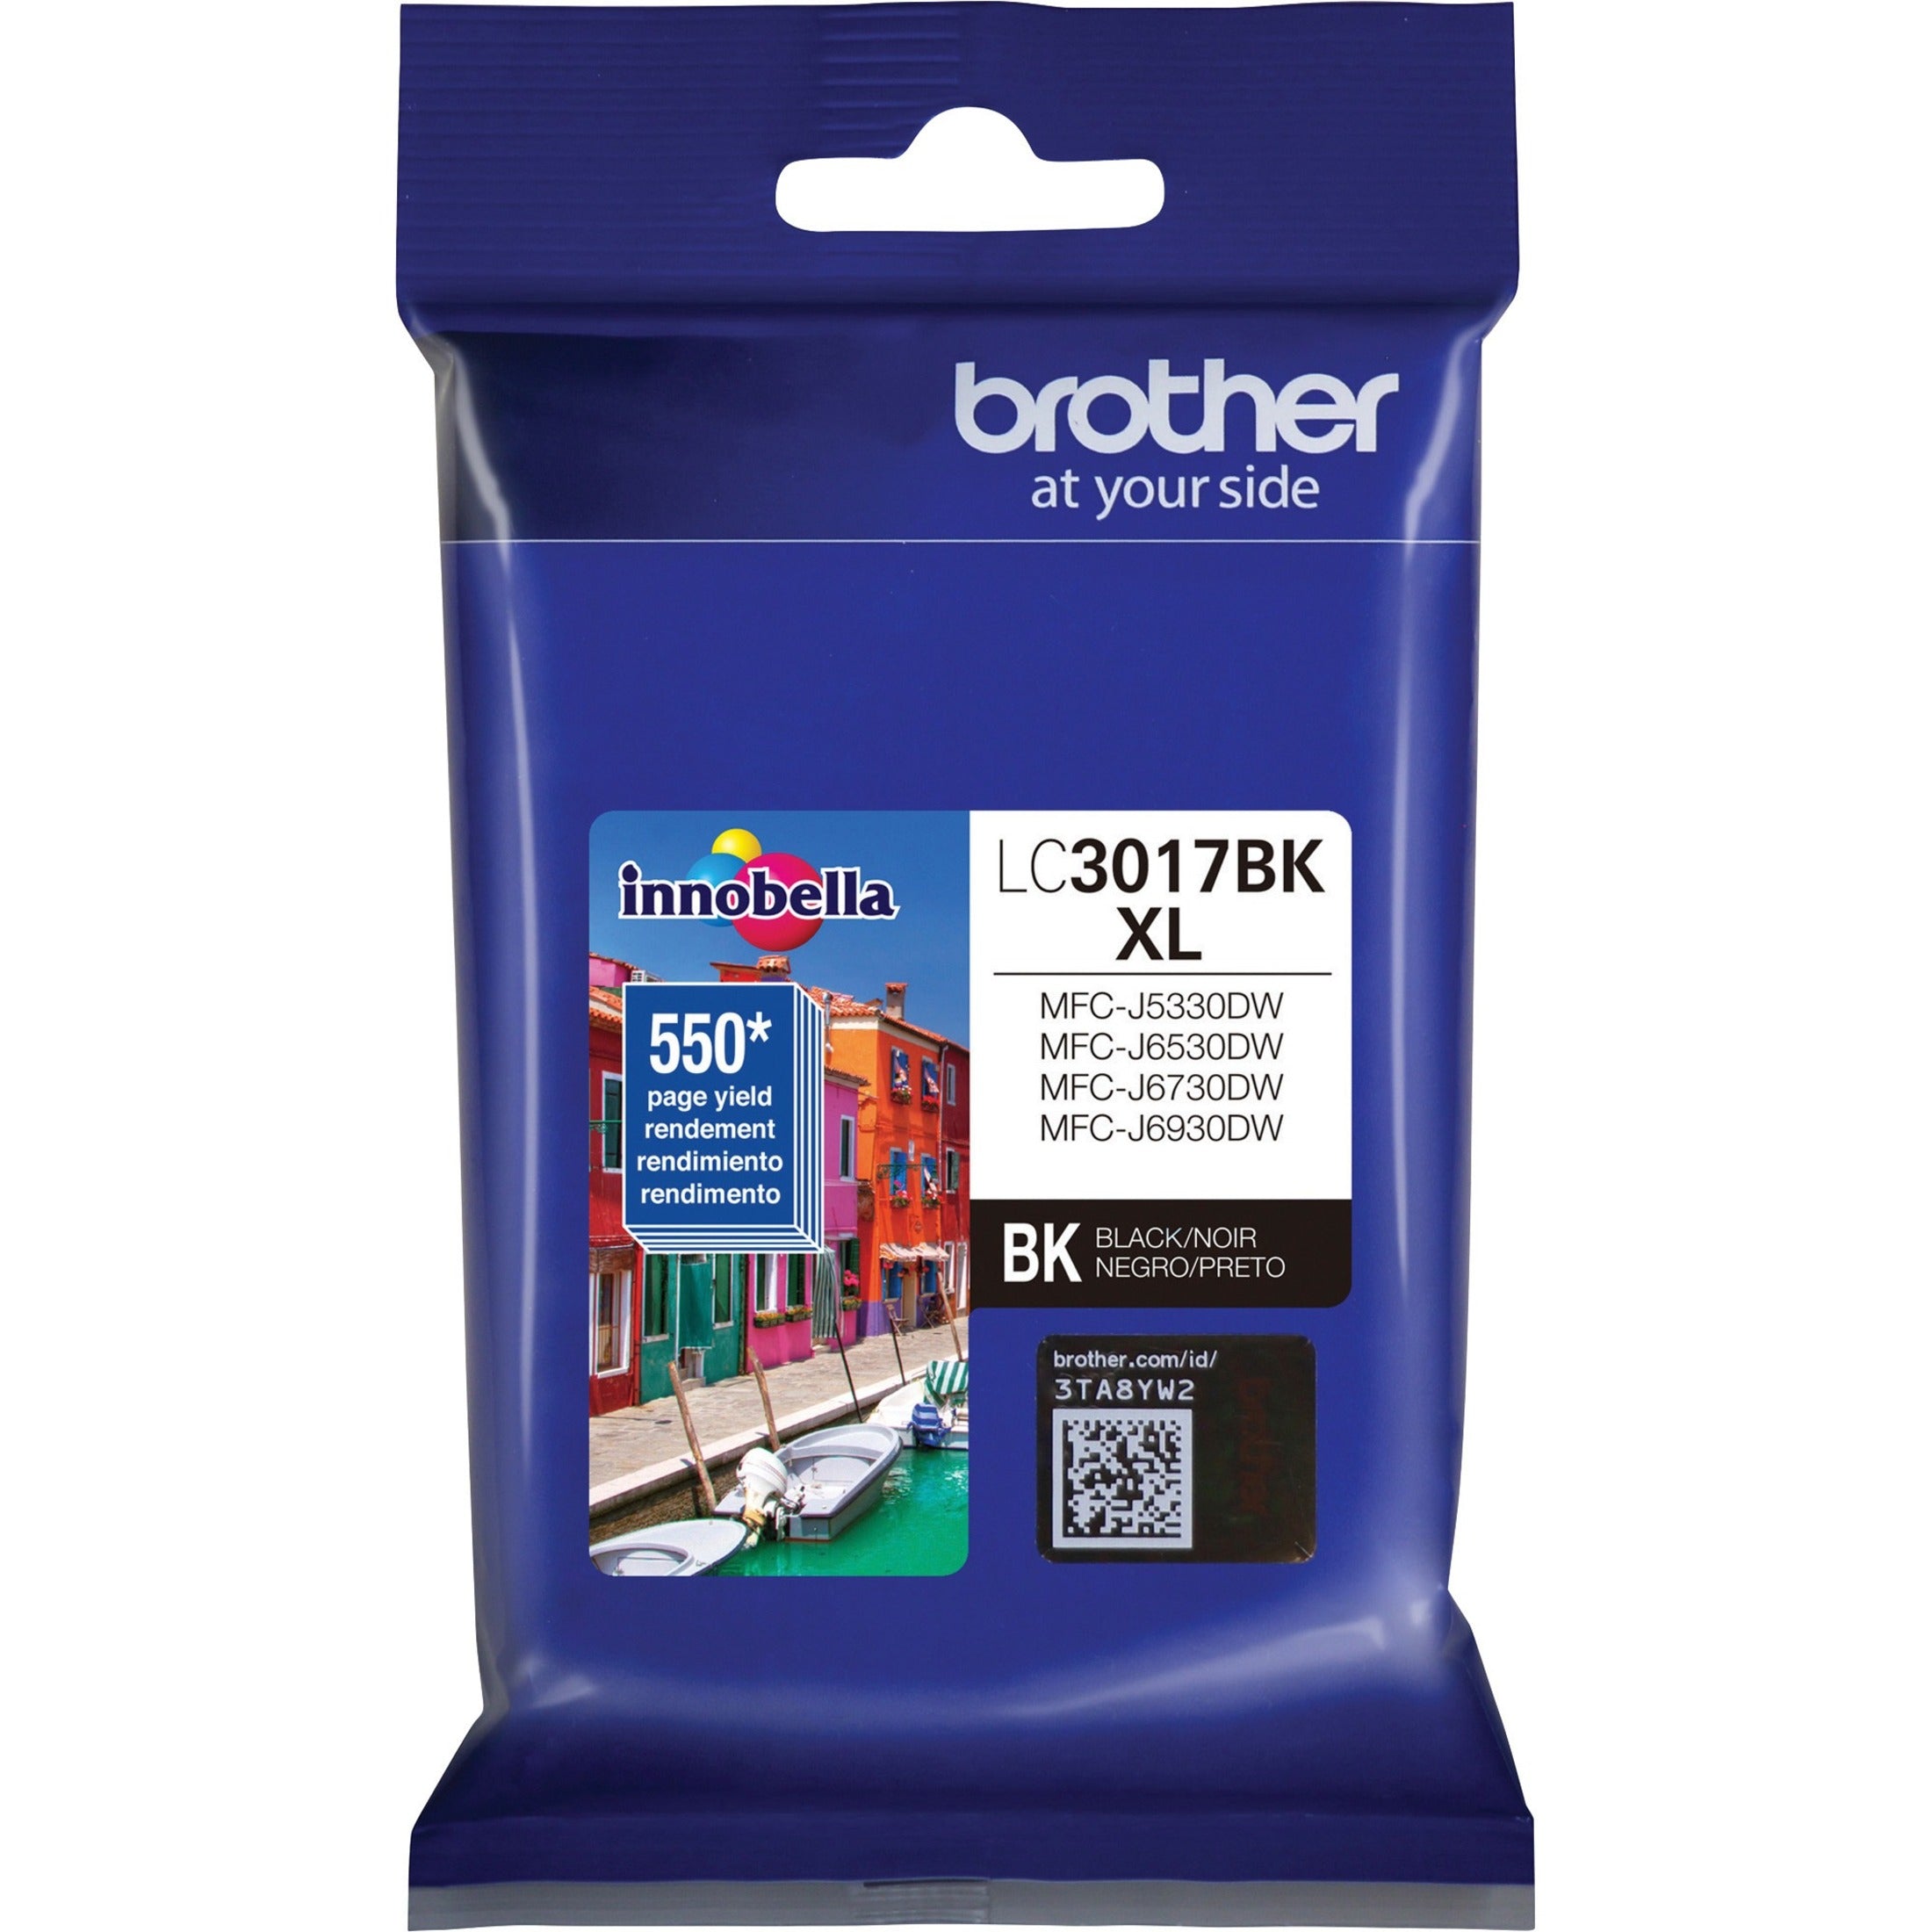 Brother LC3017BK Innobella High Yield Ink Cartridge, Black - 550 Pages